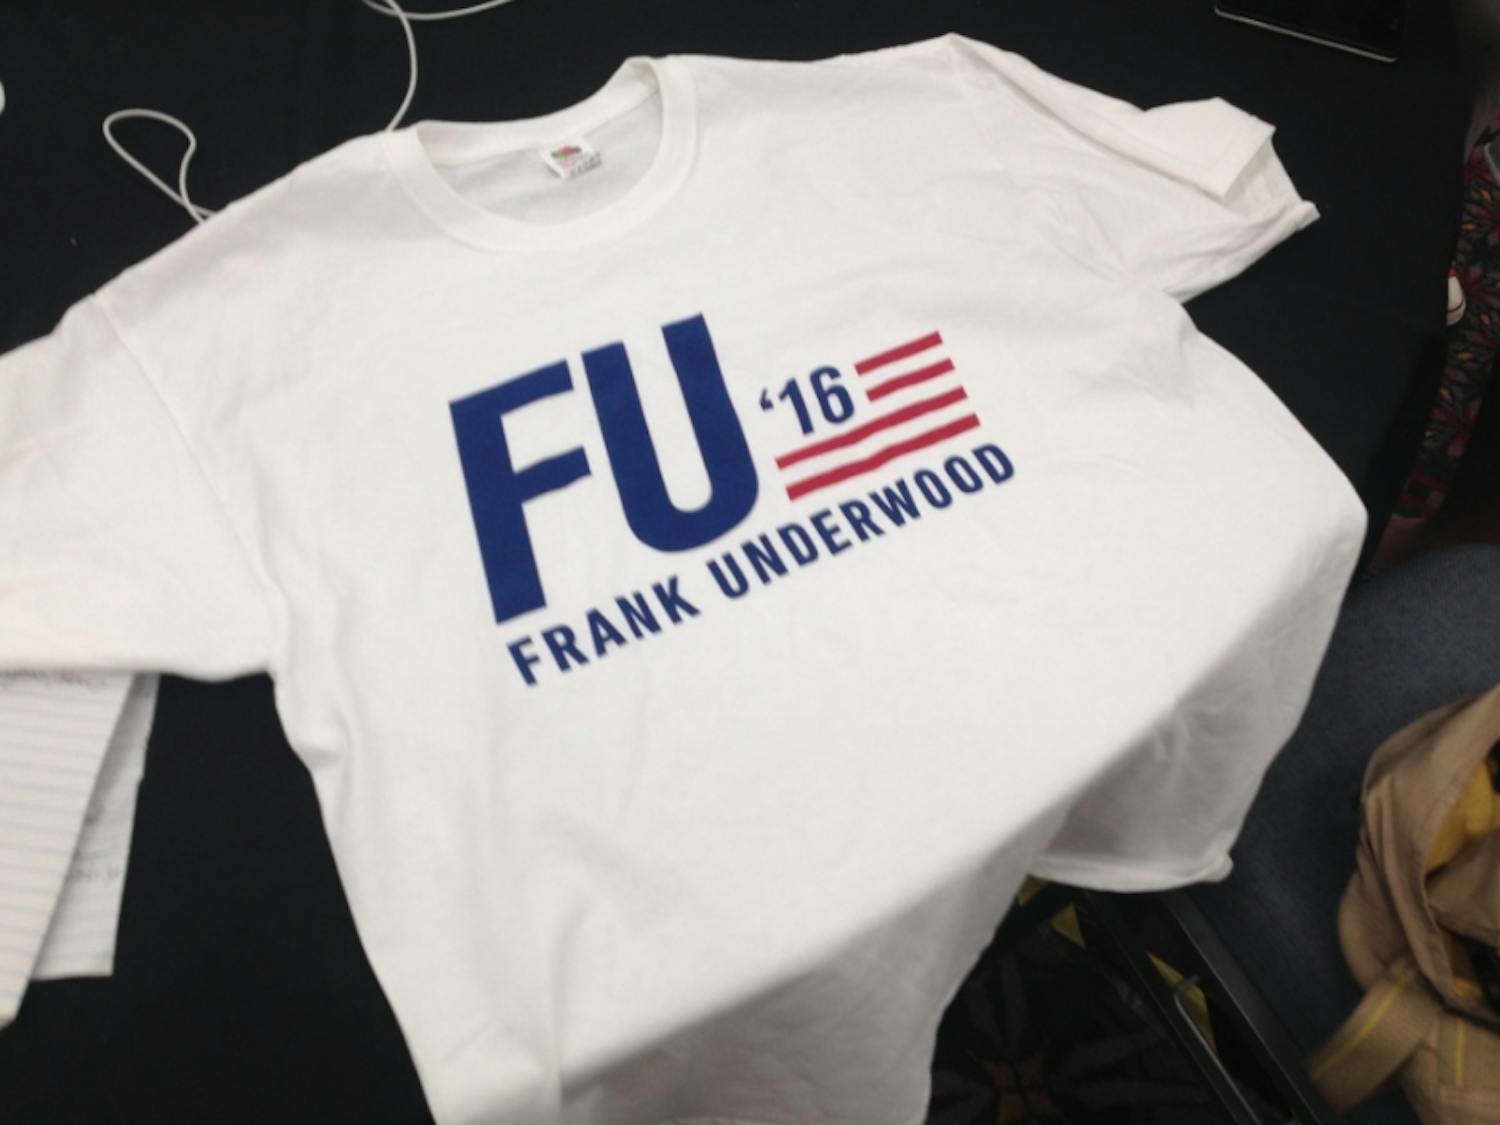 A t-shirt being distributed at the Democratic National Convention advertises the television show 'House of Cards,' whose main character Frank Underwood is a politician from South Carolina who, through blackmail, violence and cunning, becomes president of the United States. The shirts were being given away for free in Philadelphia on July 28, 2016.